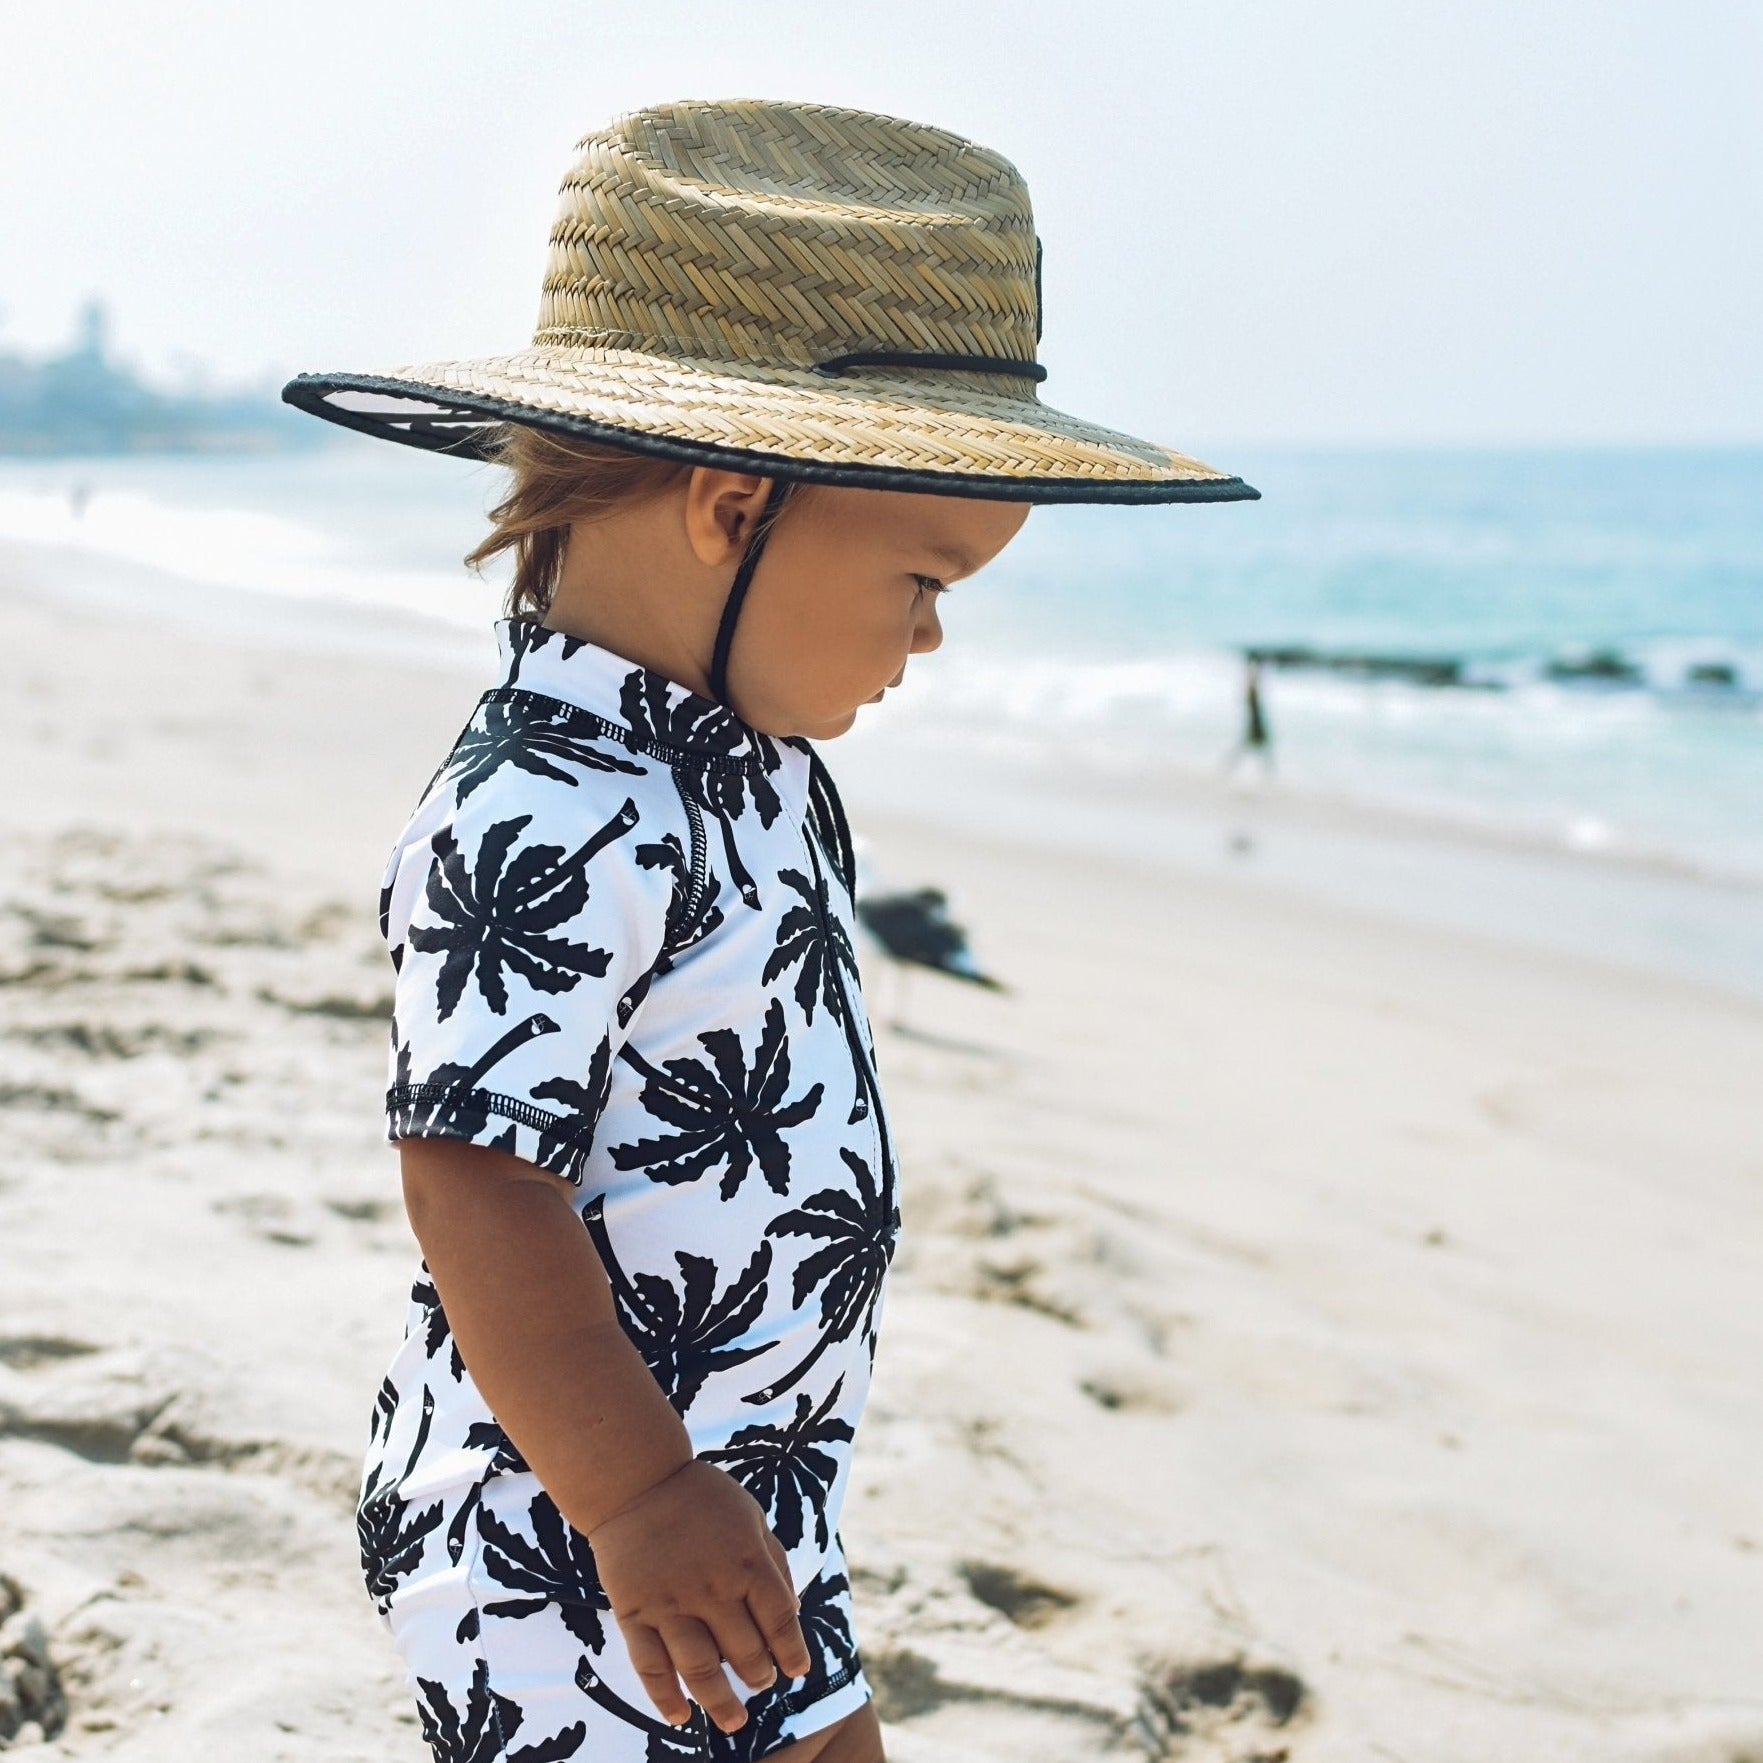 An image of a child in the George Hats Palm Straw Hat and Sunsuit on the beach.